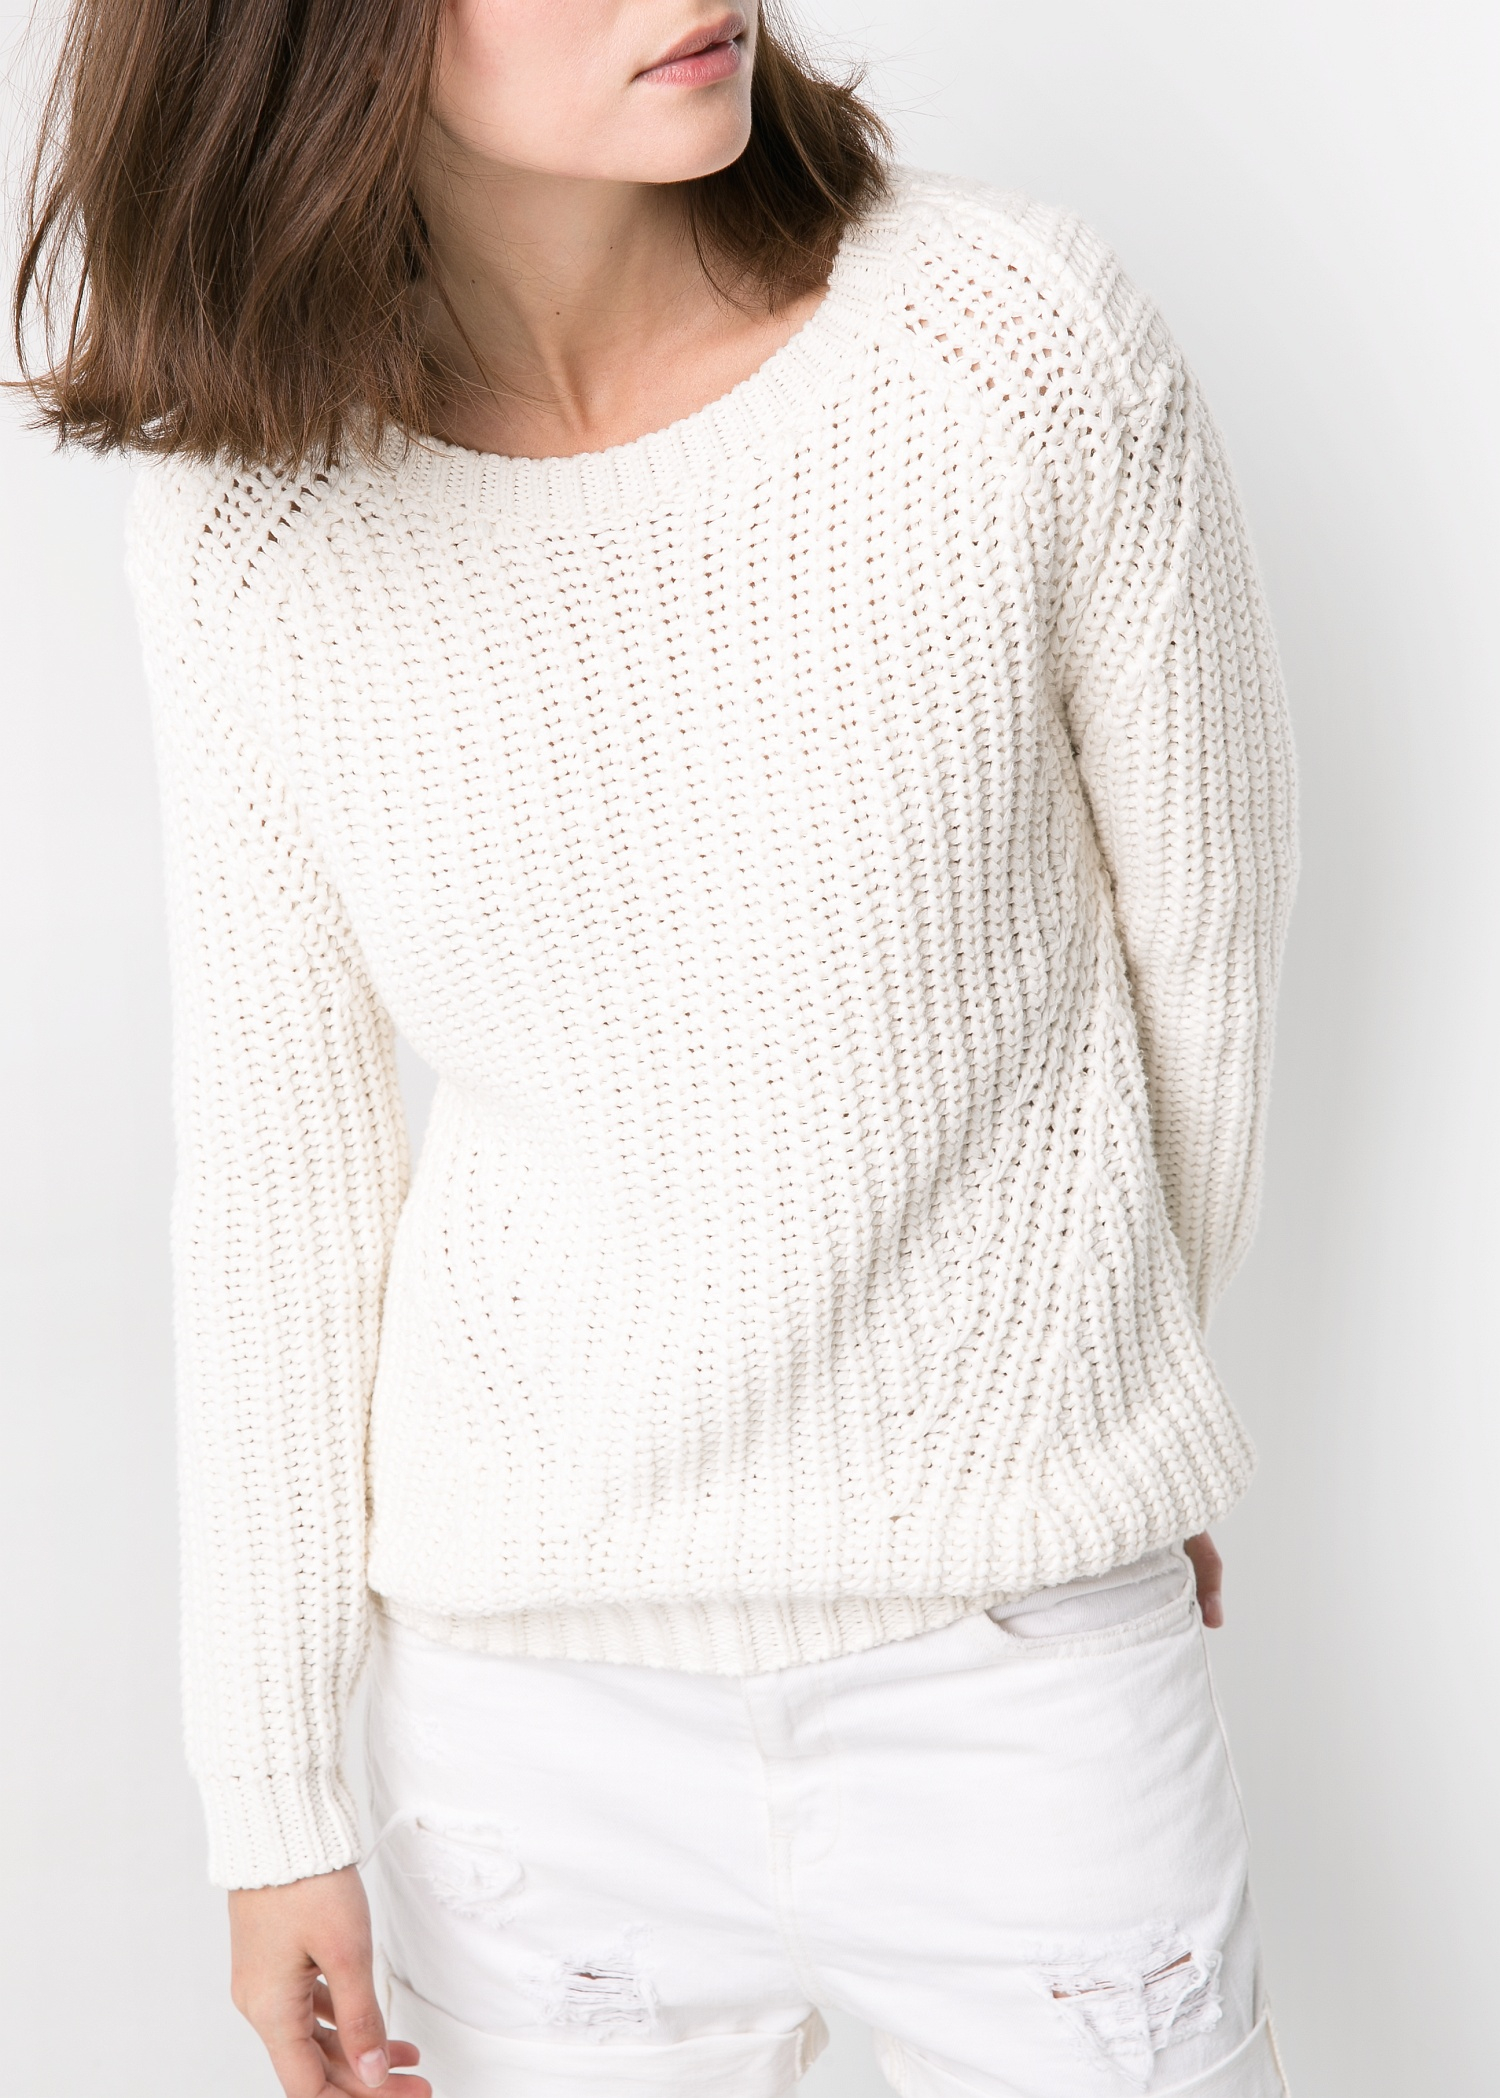 Mango Chunky-knit Sweater in White - Lyst